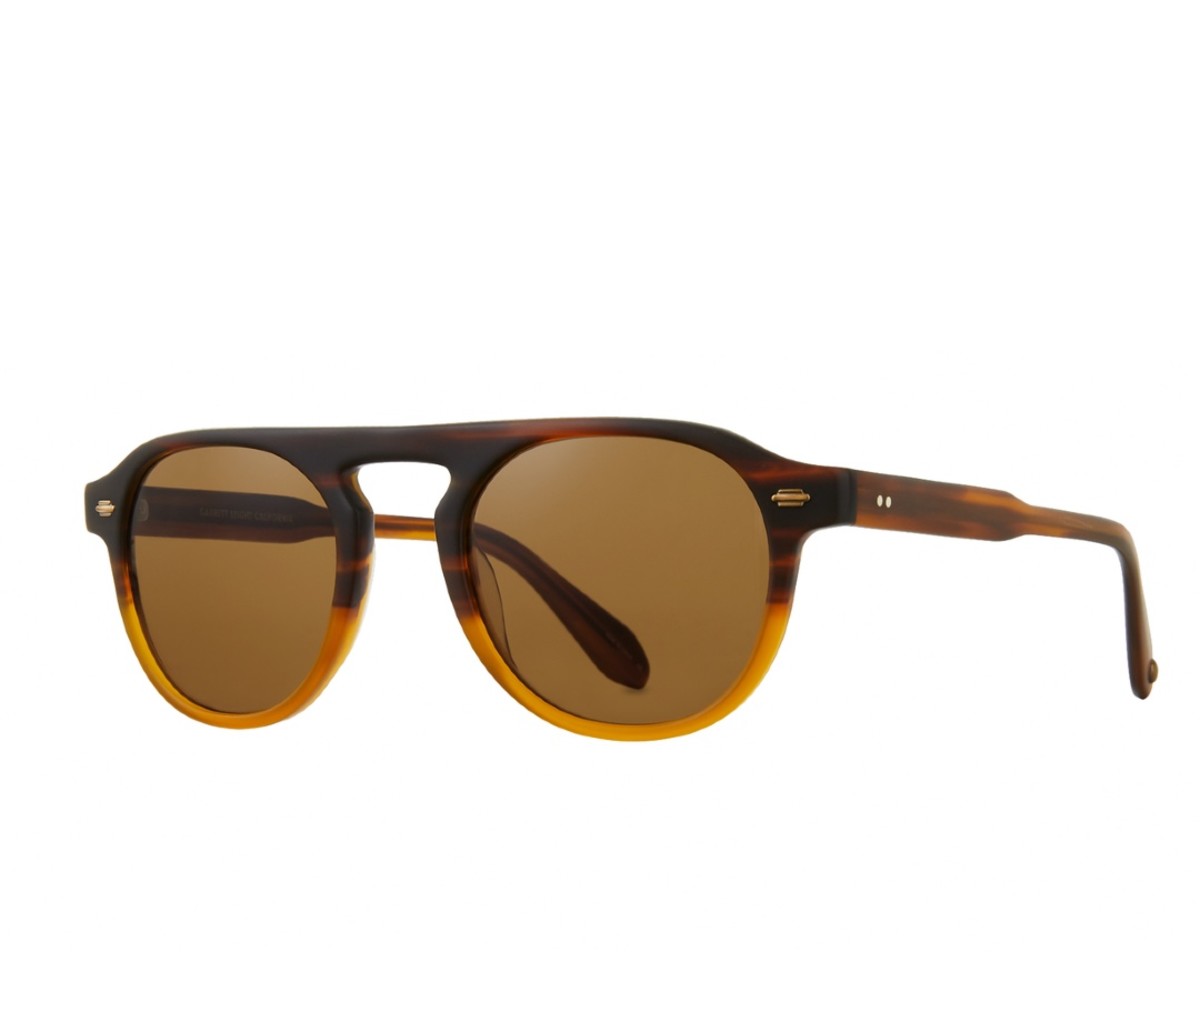 The Best Men's Summer Sunglasses to Stand Out in 2020 - Men's Journal